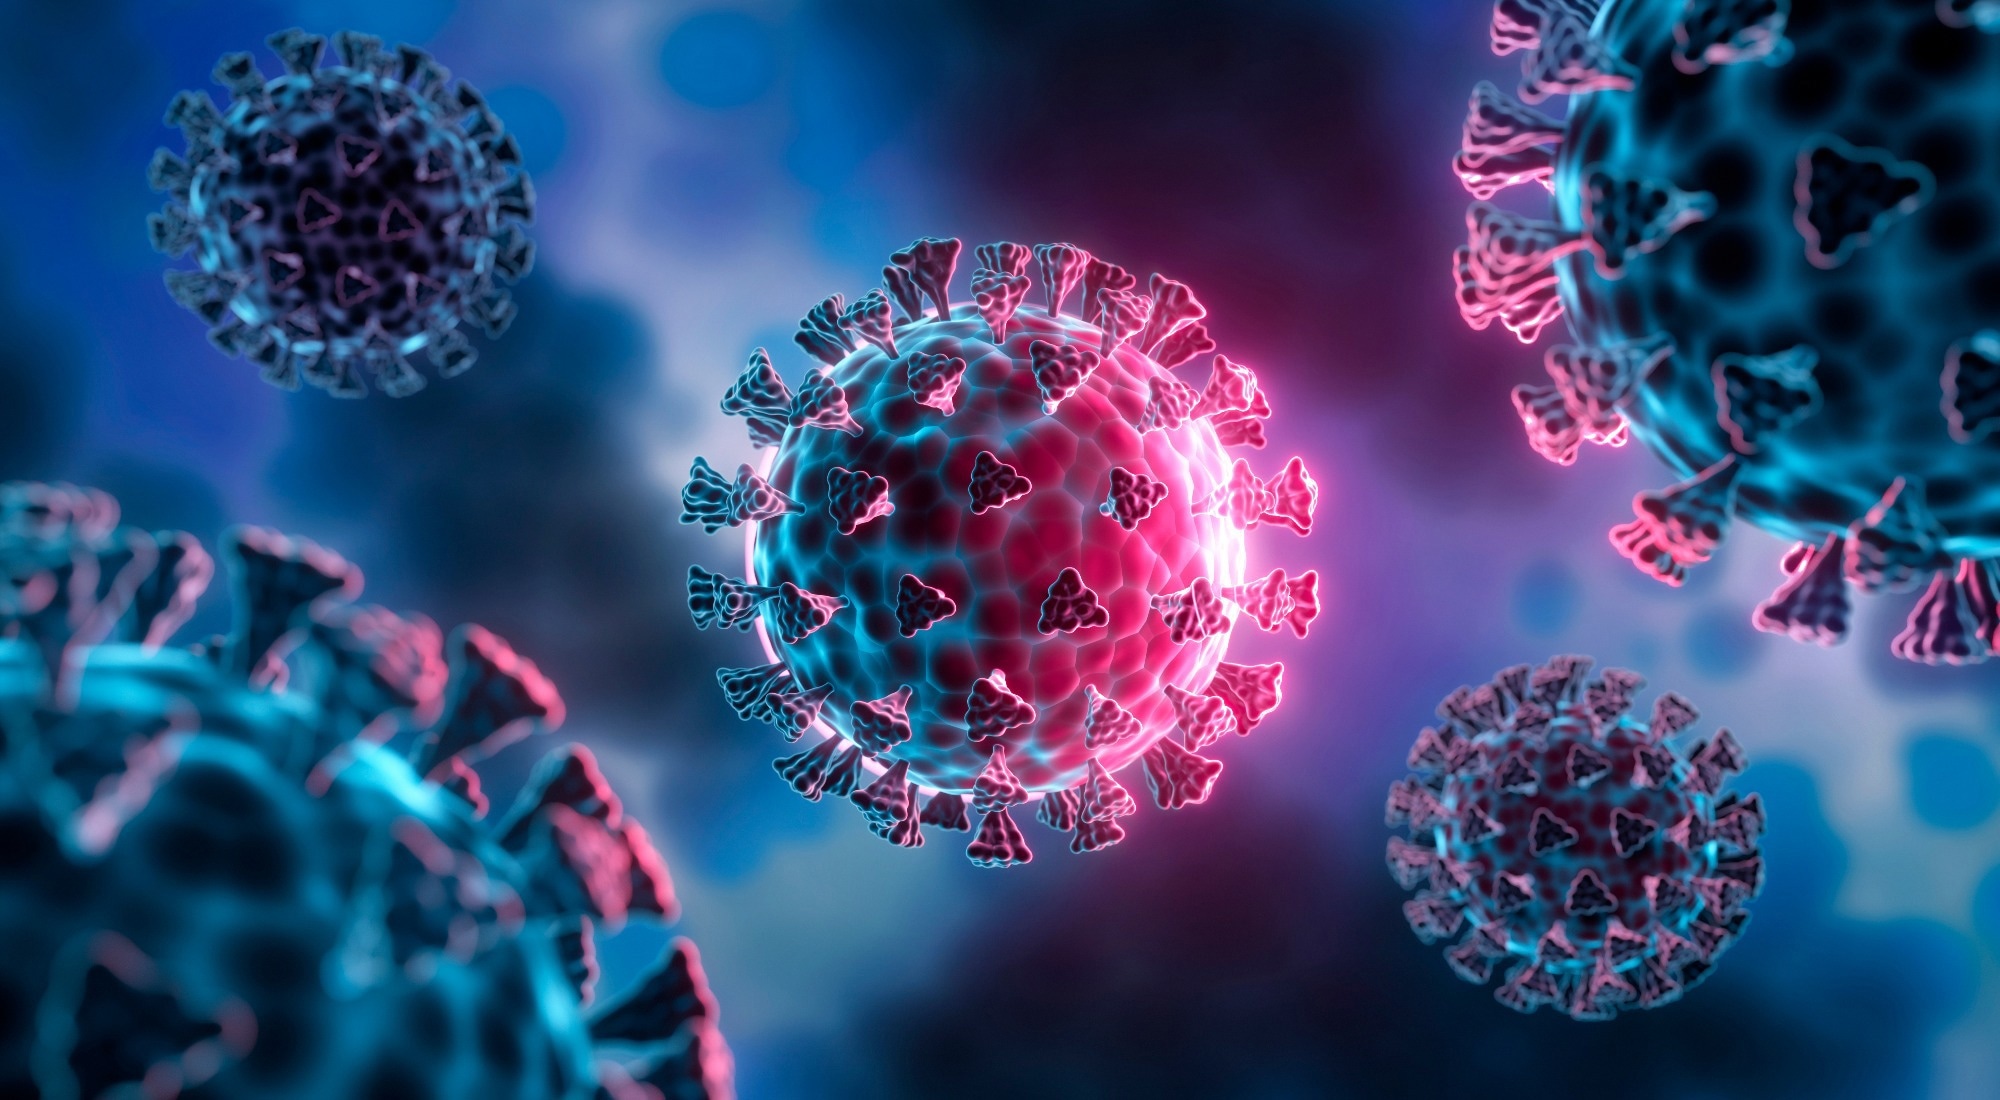 Study: Genome charaterization based on the Spike-614 and NS8-84 loci of SARS-CoV-2 reveals two major onsets of the COVID-19 pandemic. Image Credit: peterschreiber.media/Shutterstock